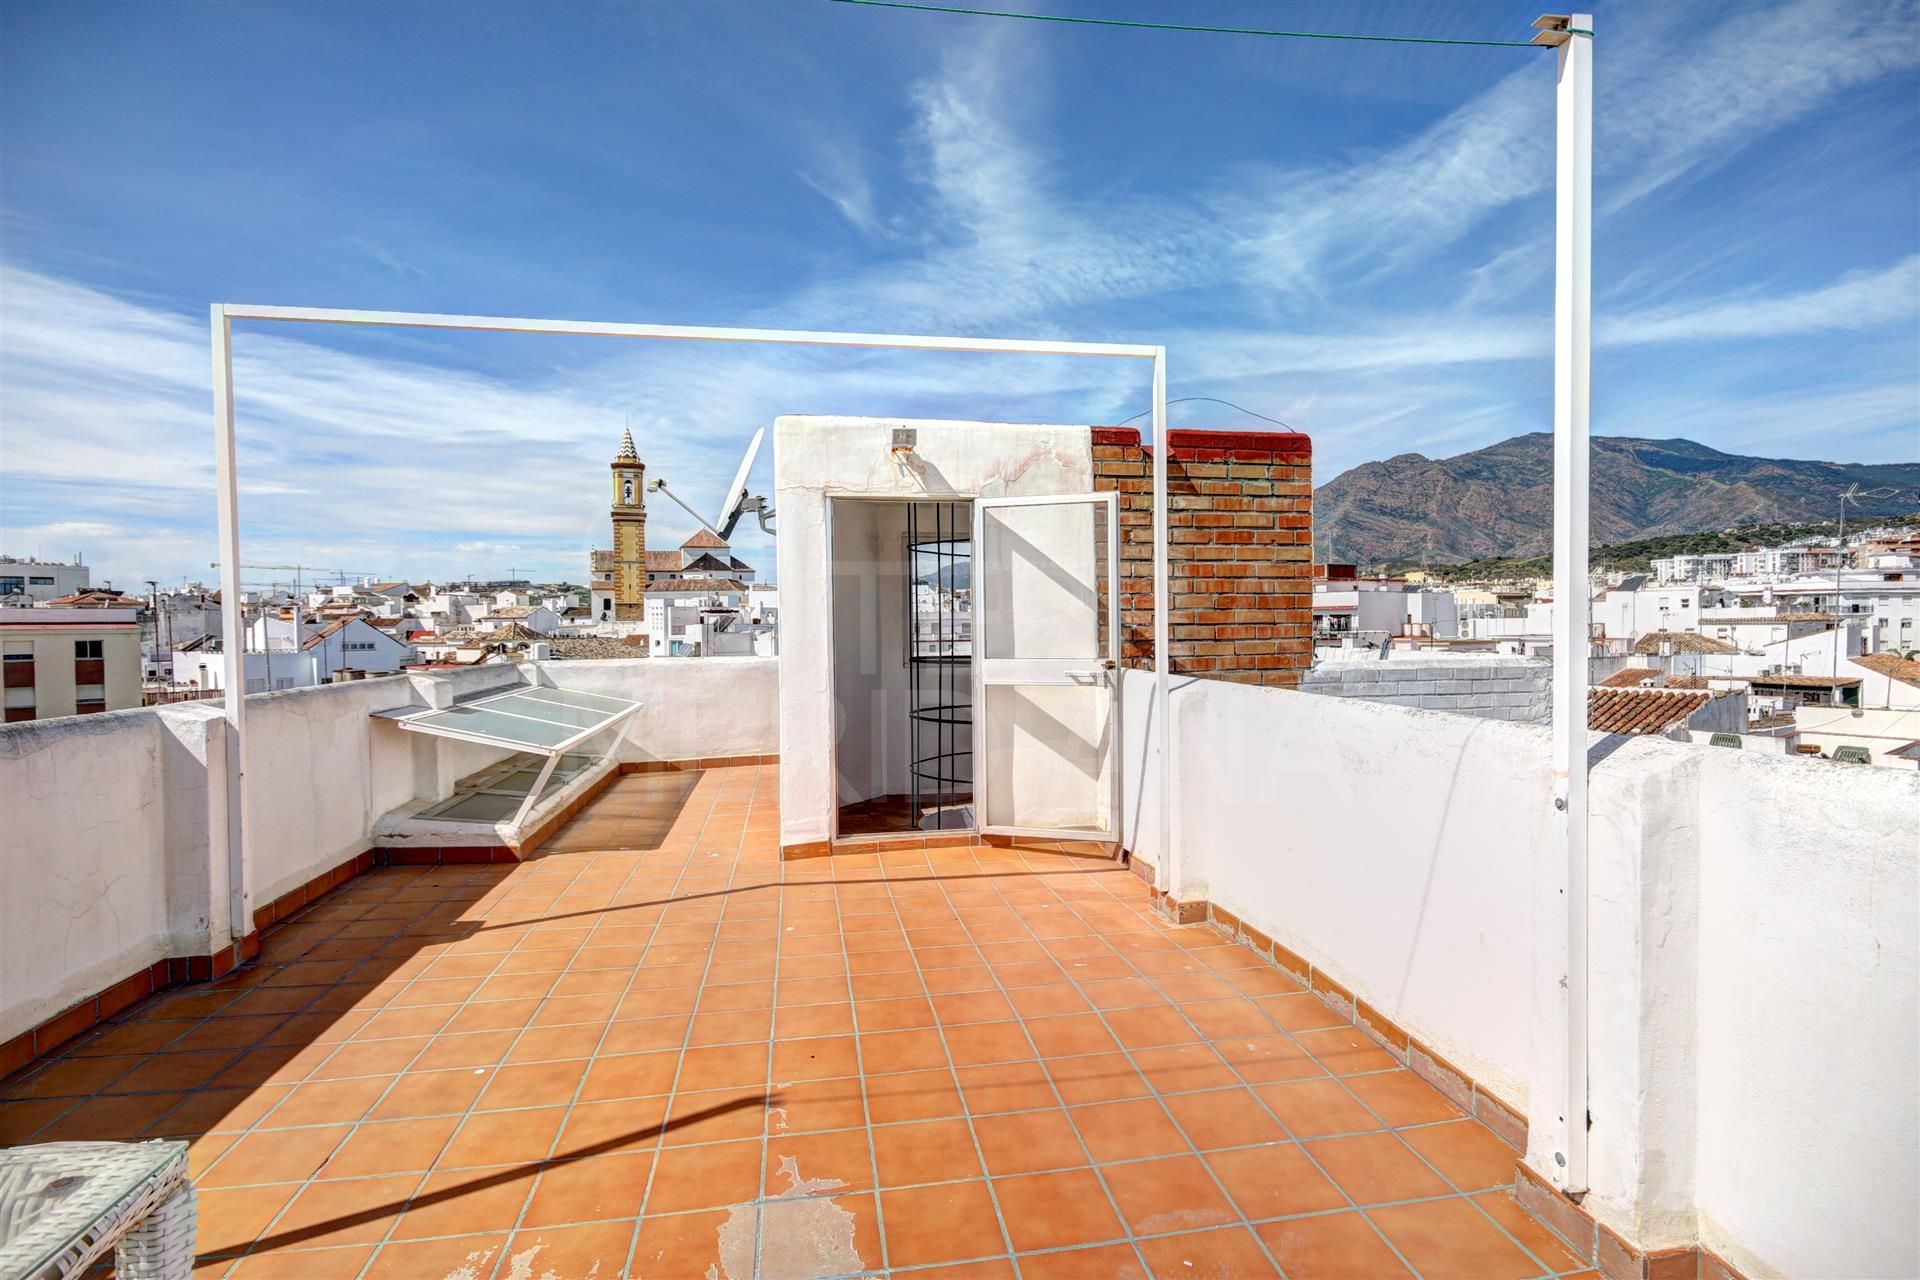 Duplex apartment for sale in one of the best streets of the old town of Estepona